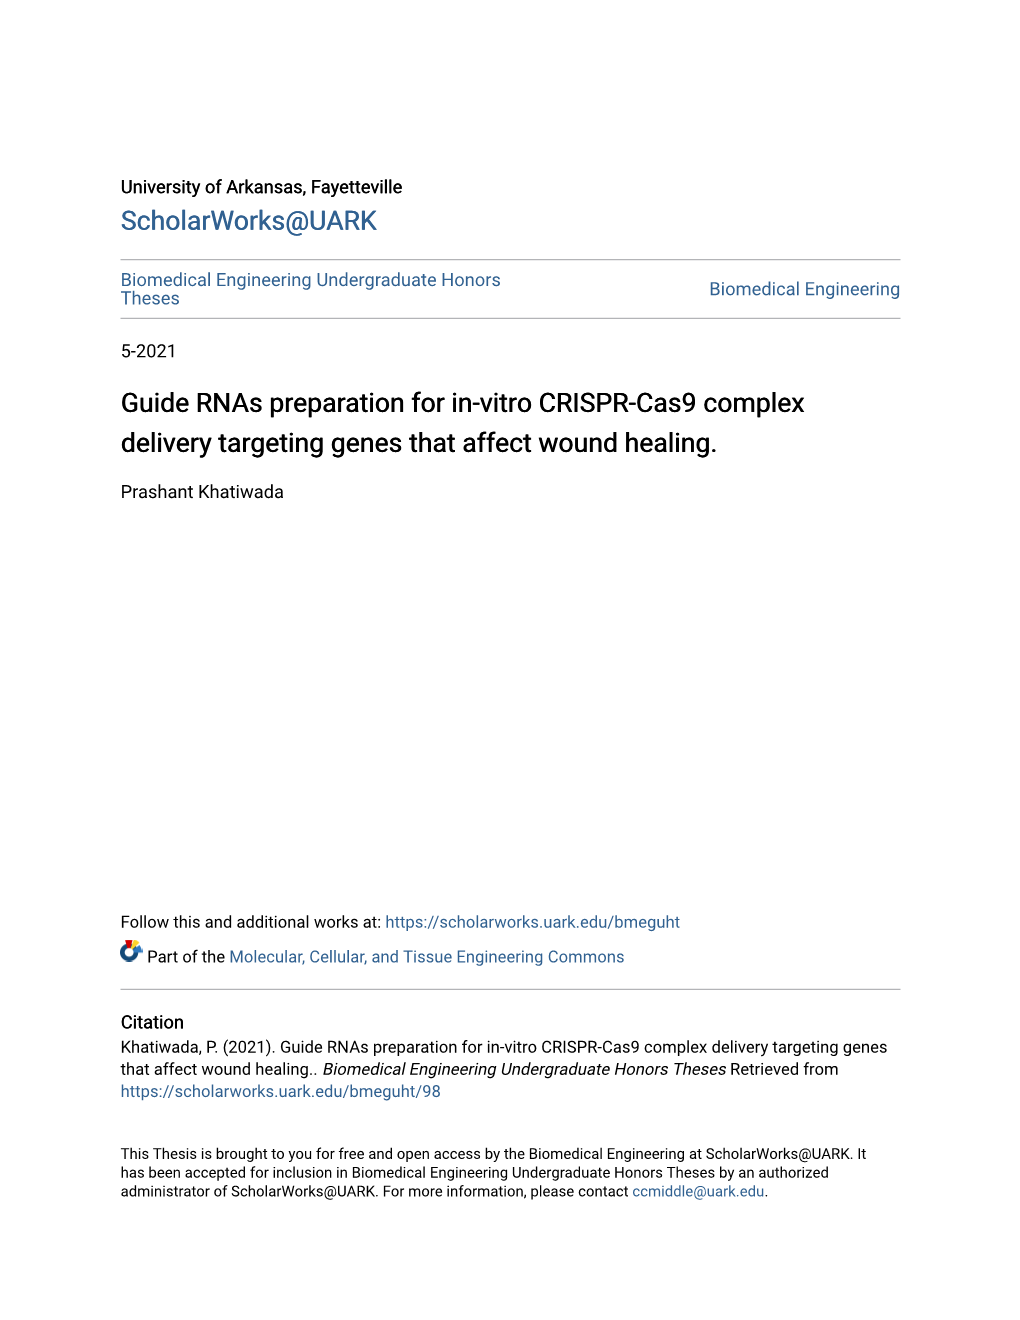 Guide Rnas Preparation for In-Vitro CRISPR-Cas9 Complex Delivery Targeting Genes That Affect Wound Healing